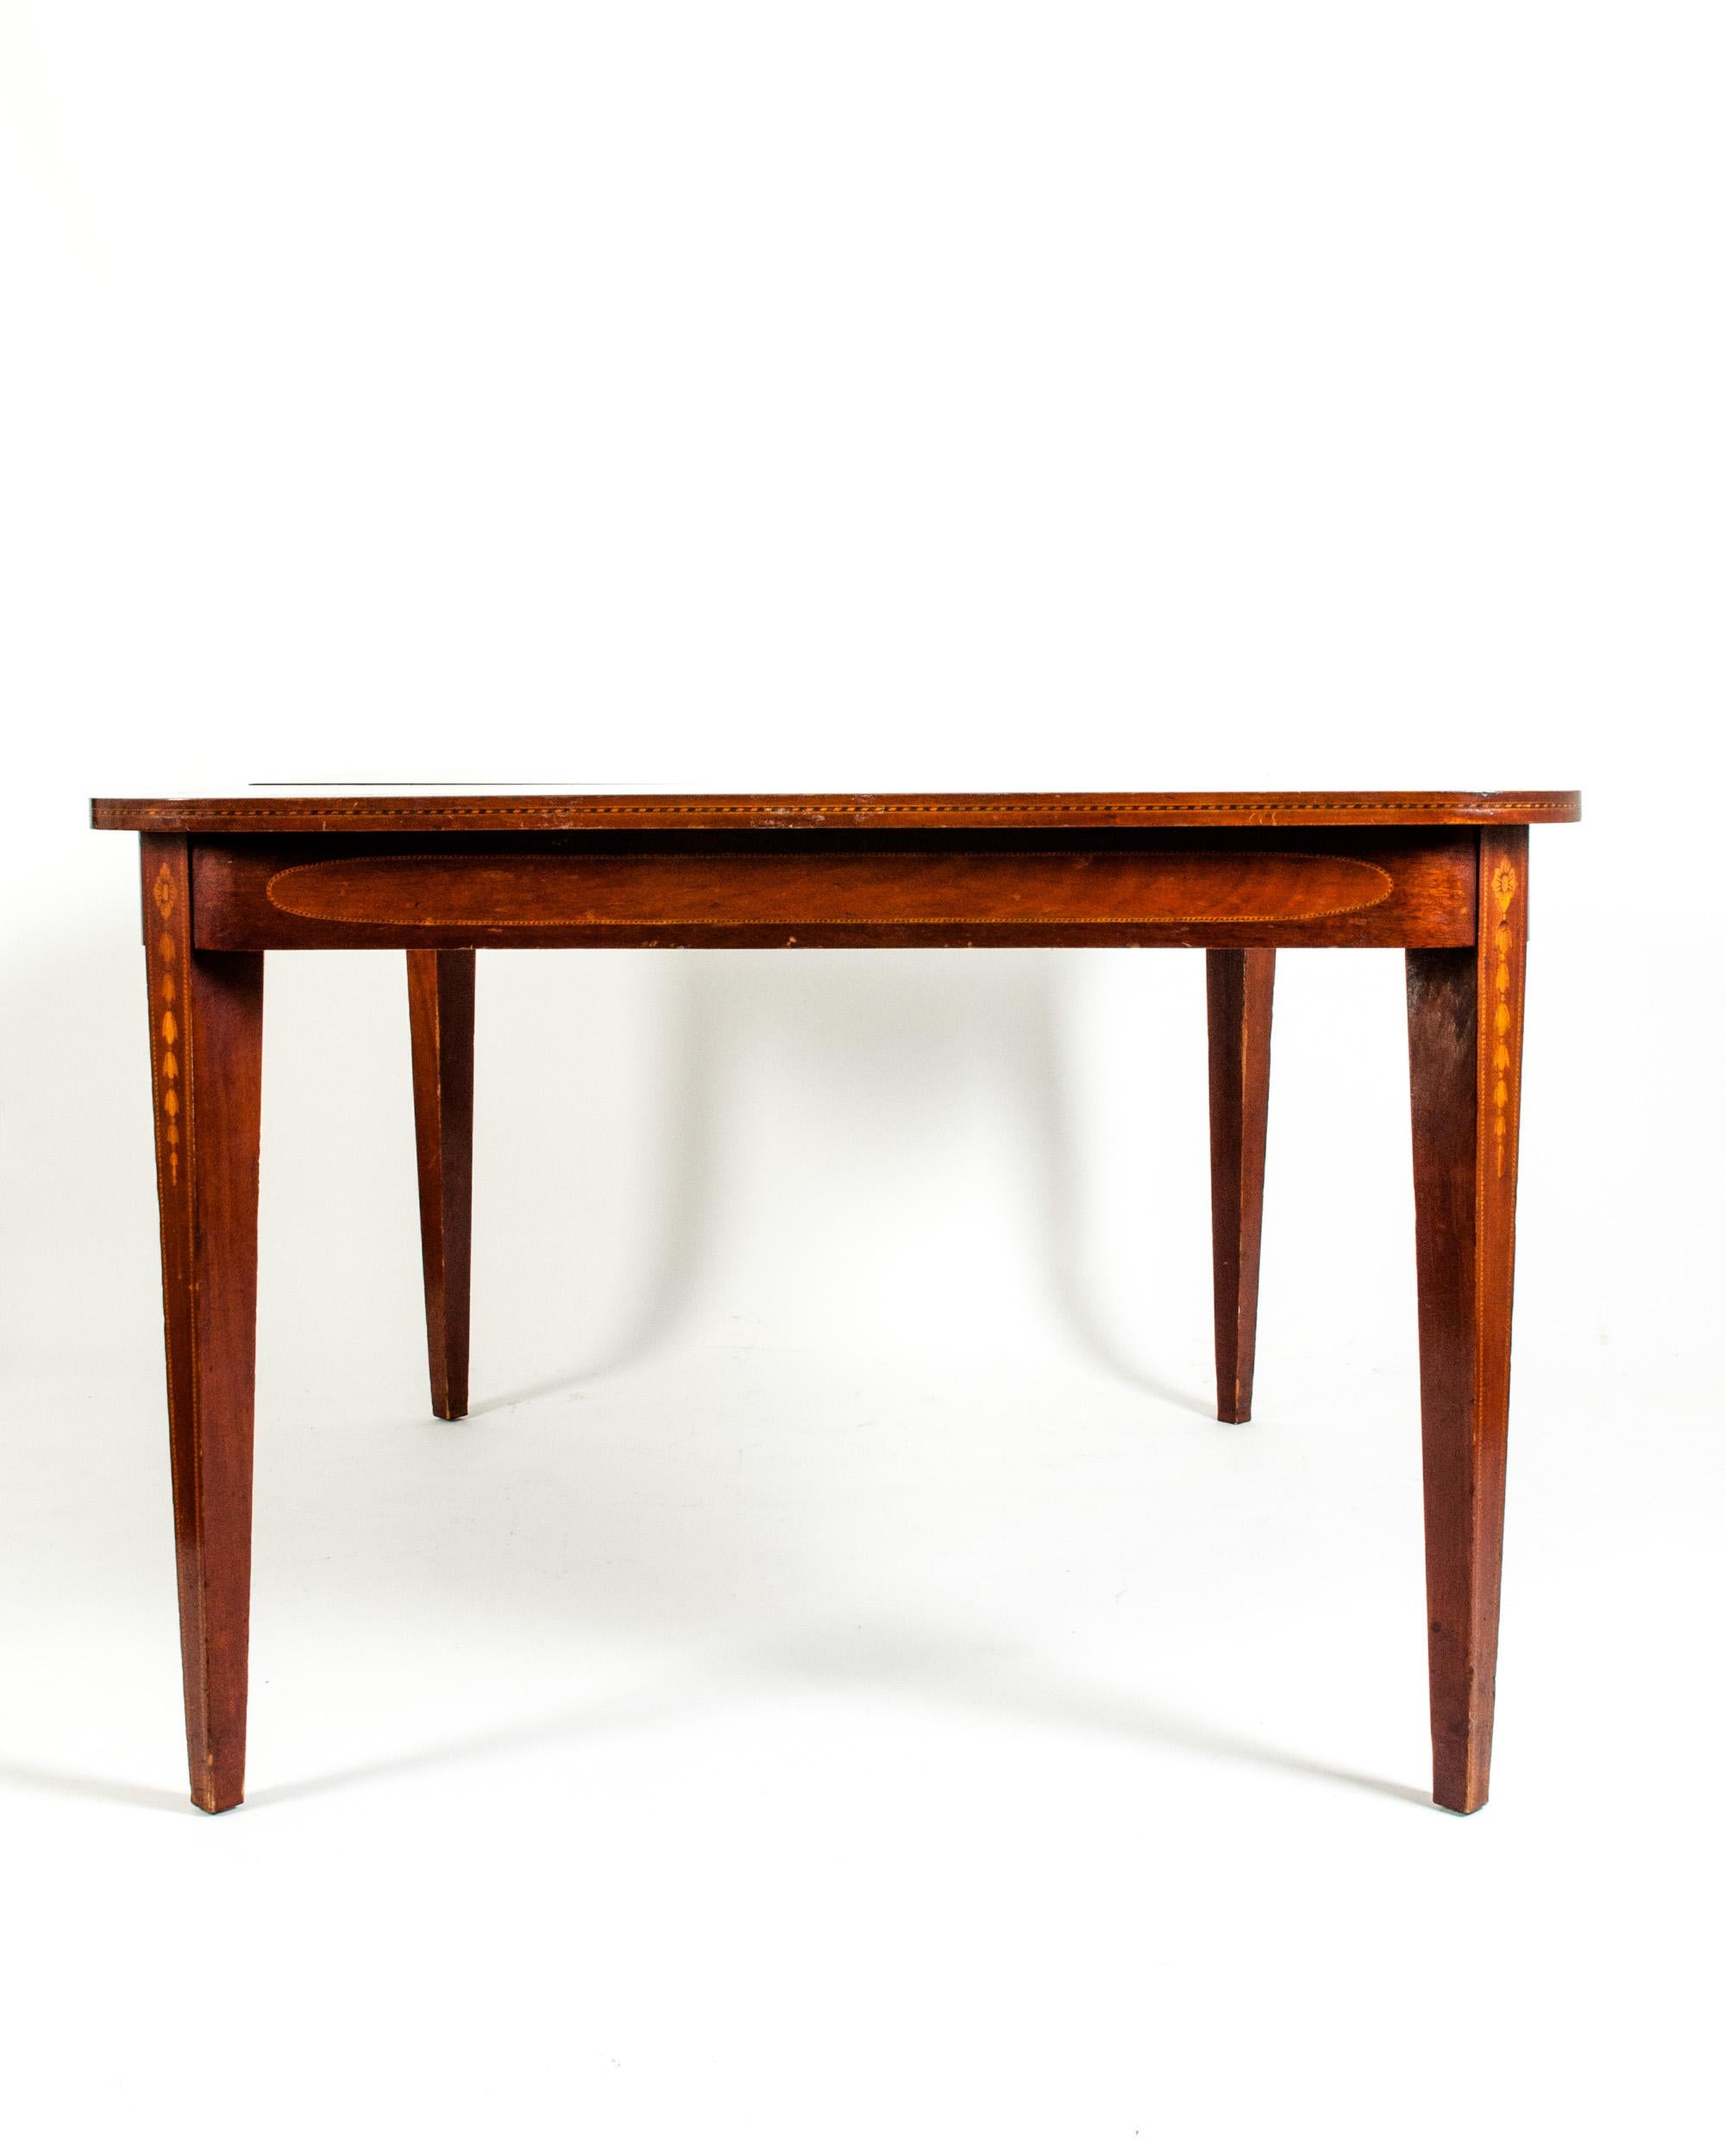 Antique English mahogany dining table with inlaid design details. The table is in excellent antique condition. Minor wear consistent with use / age. The table measure about 58 inches L x 44 inches W x 30 inches H. The table includes two interior